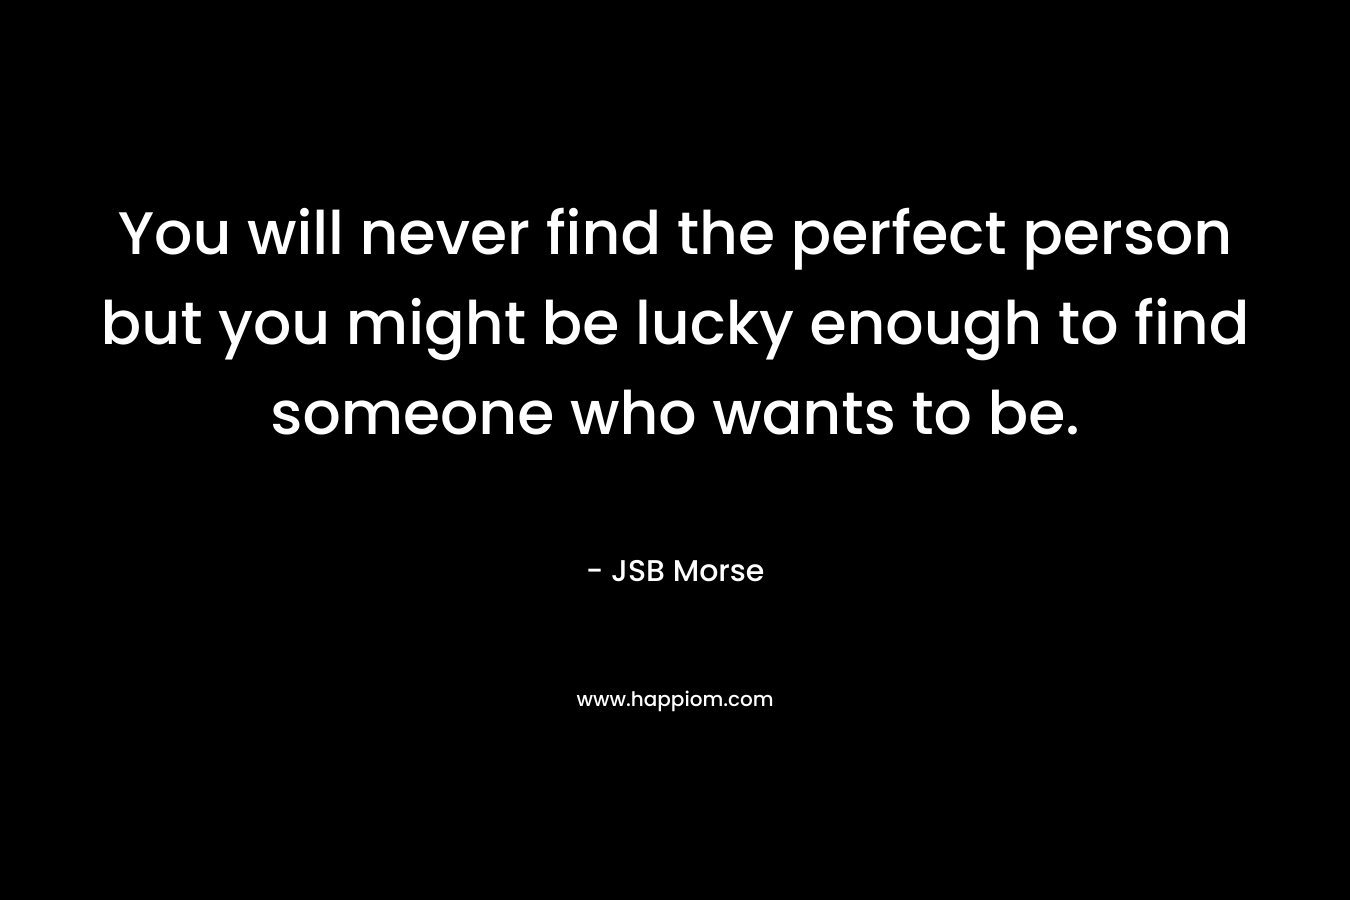 You will never find the perfect person but you might be lucky enough to find someone who wants to be.